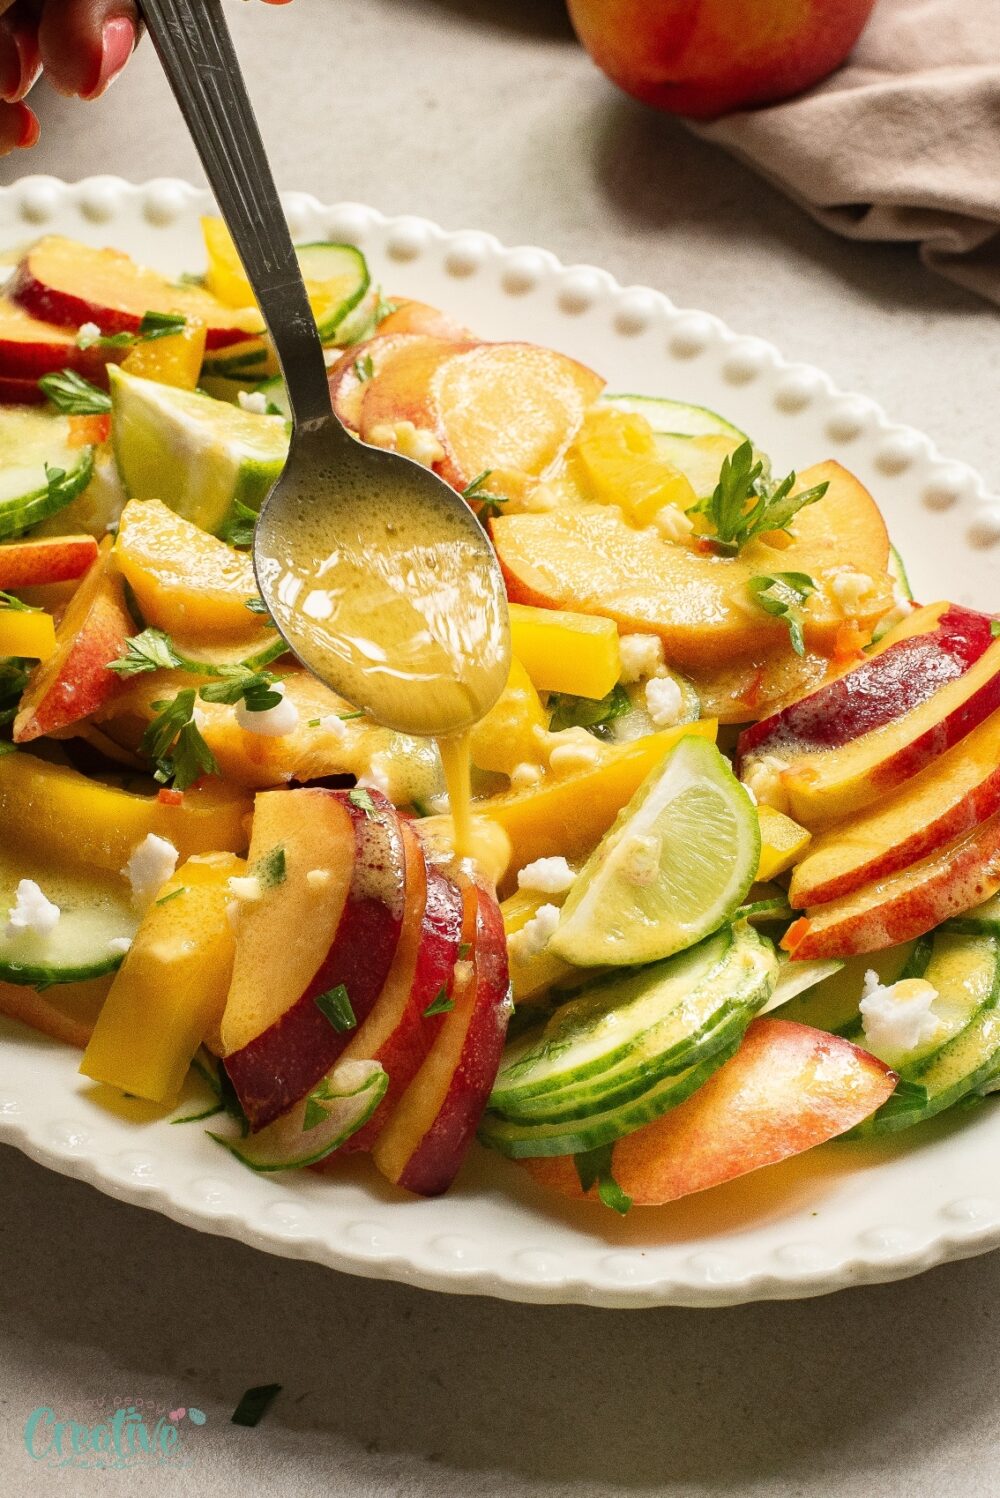 Customize your meal with a refreshing nectarine salad including cucumber slices and nectarine wedges.